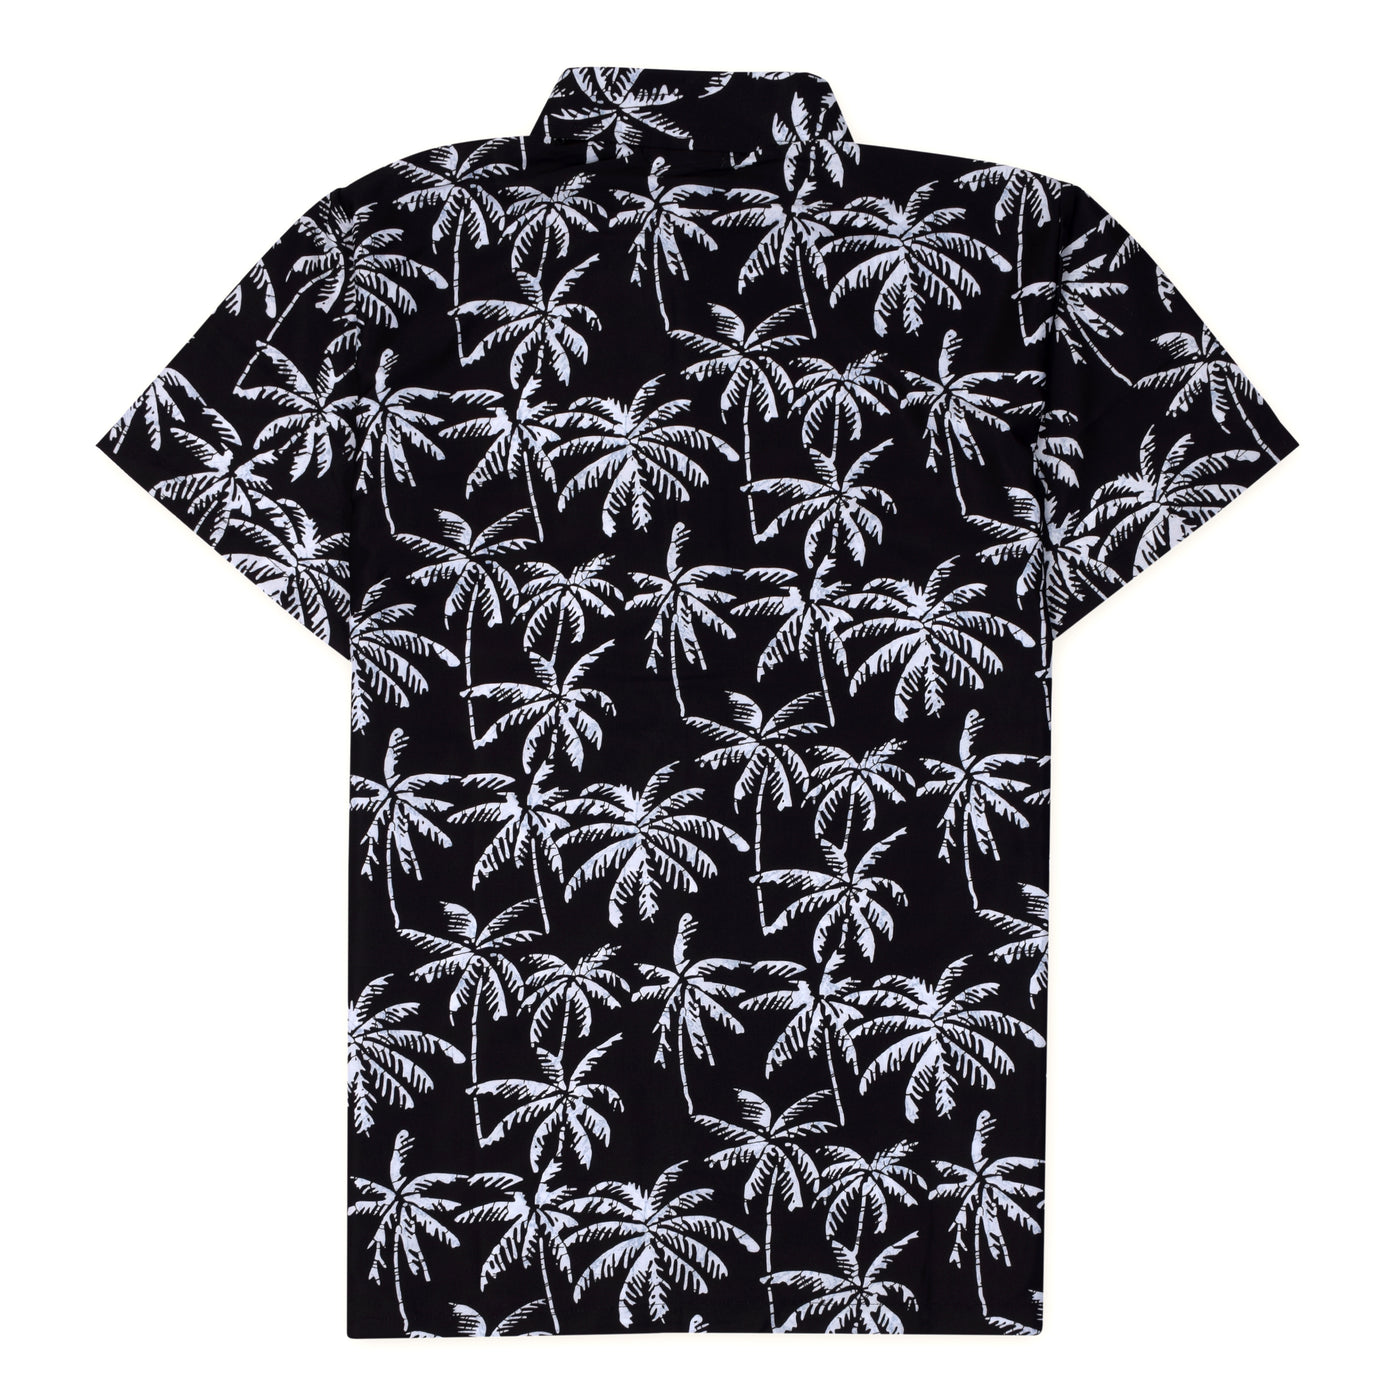 The Palmeras Repeat Party Shirt